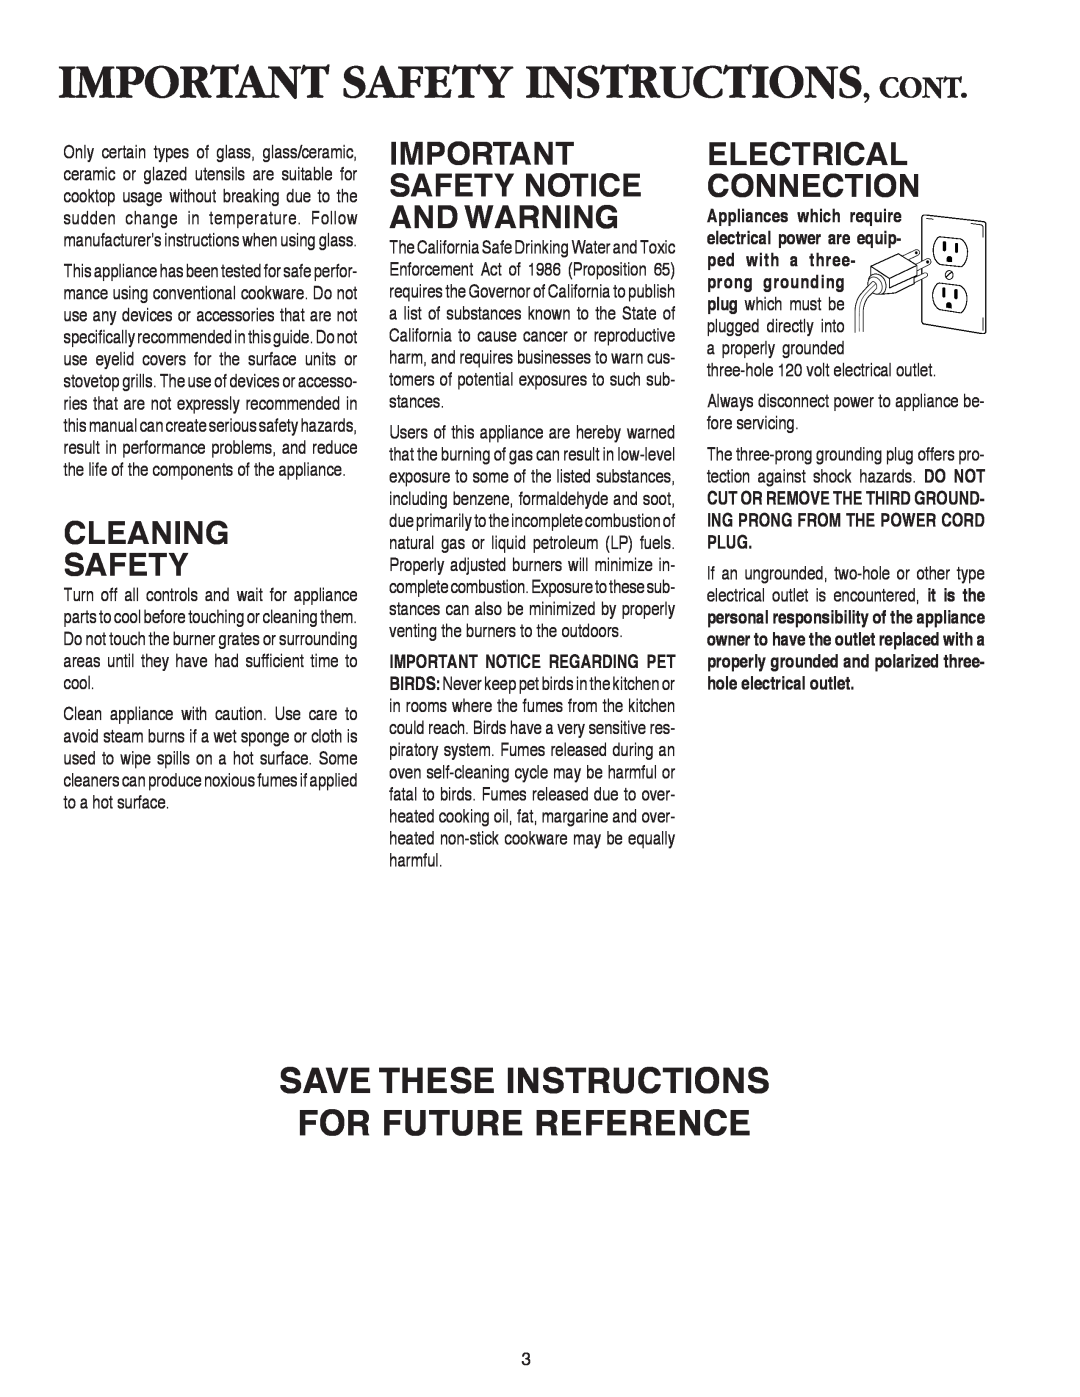 Maytag AKS3040 Important Safety Instructions, Cont, Save These Instructions For Future Reference, Cleaning Safety 